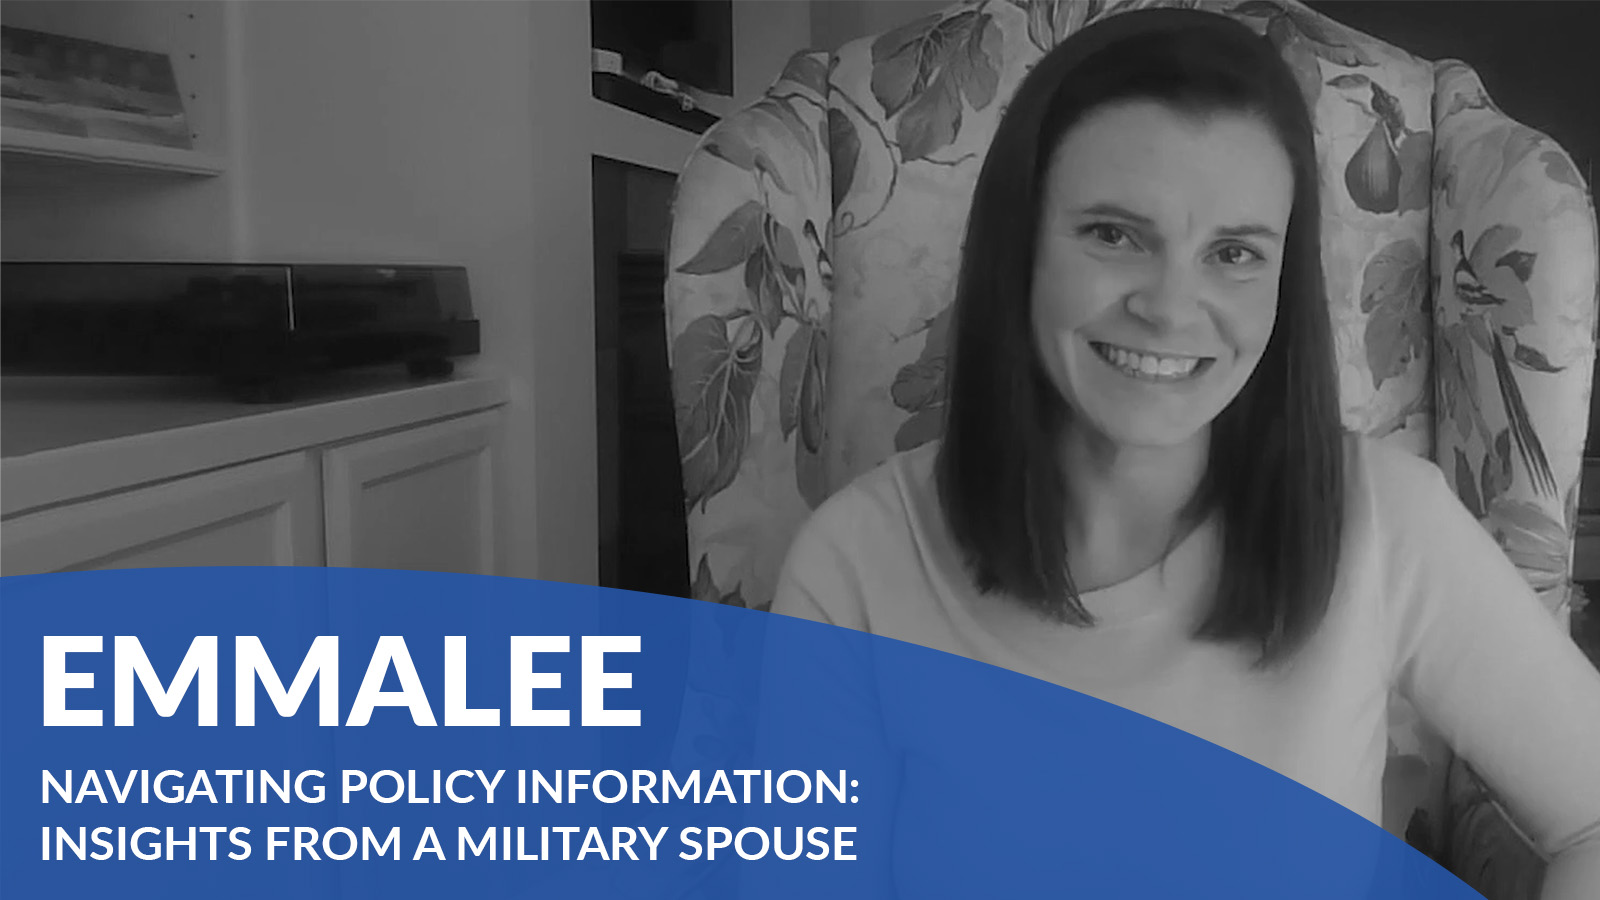 emmalee's story - navigating policy information: insights from a military spouse